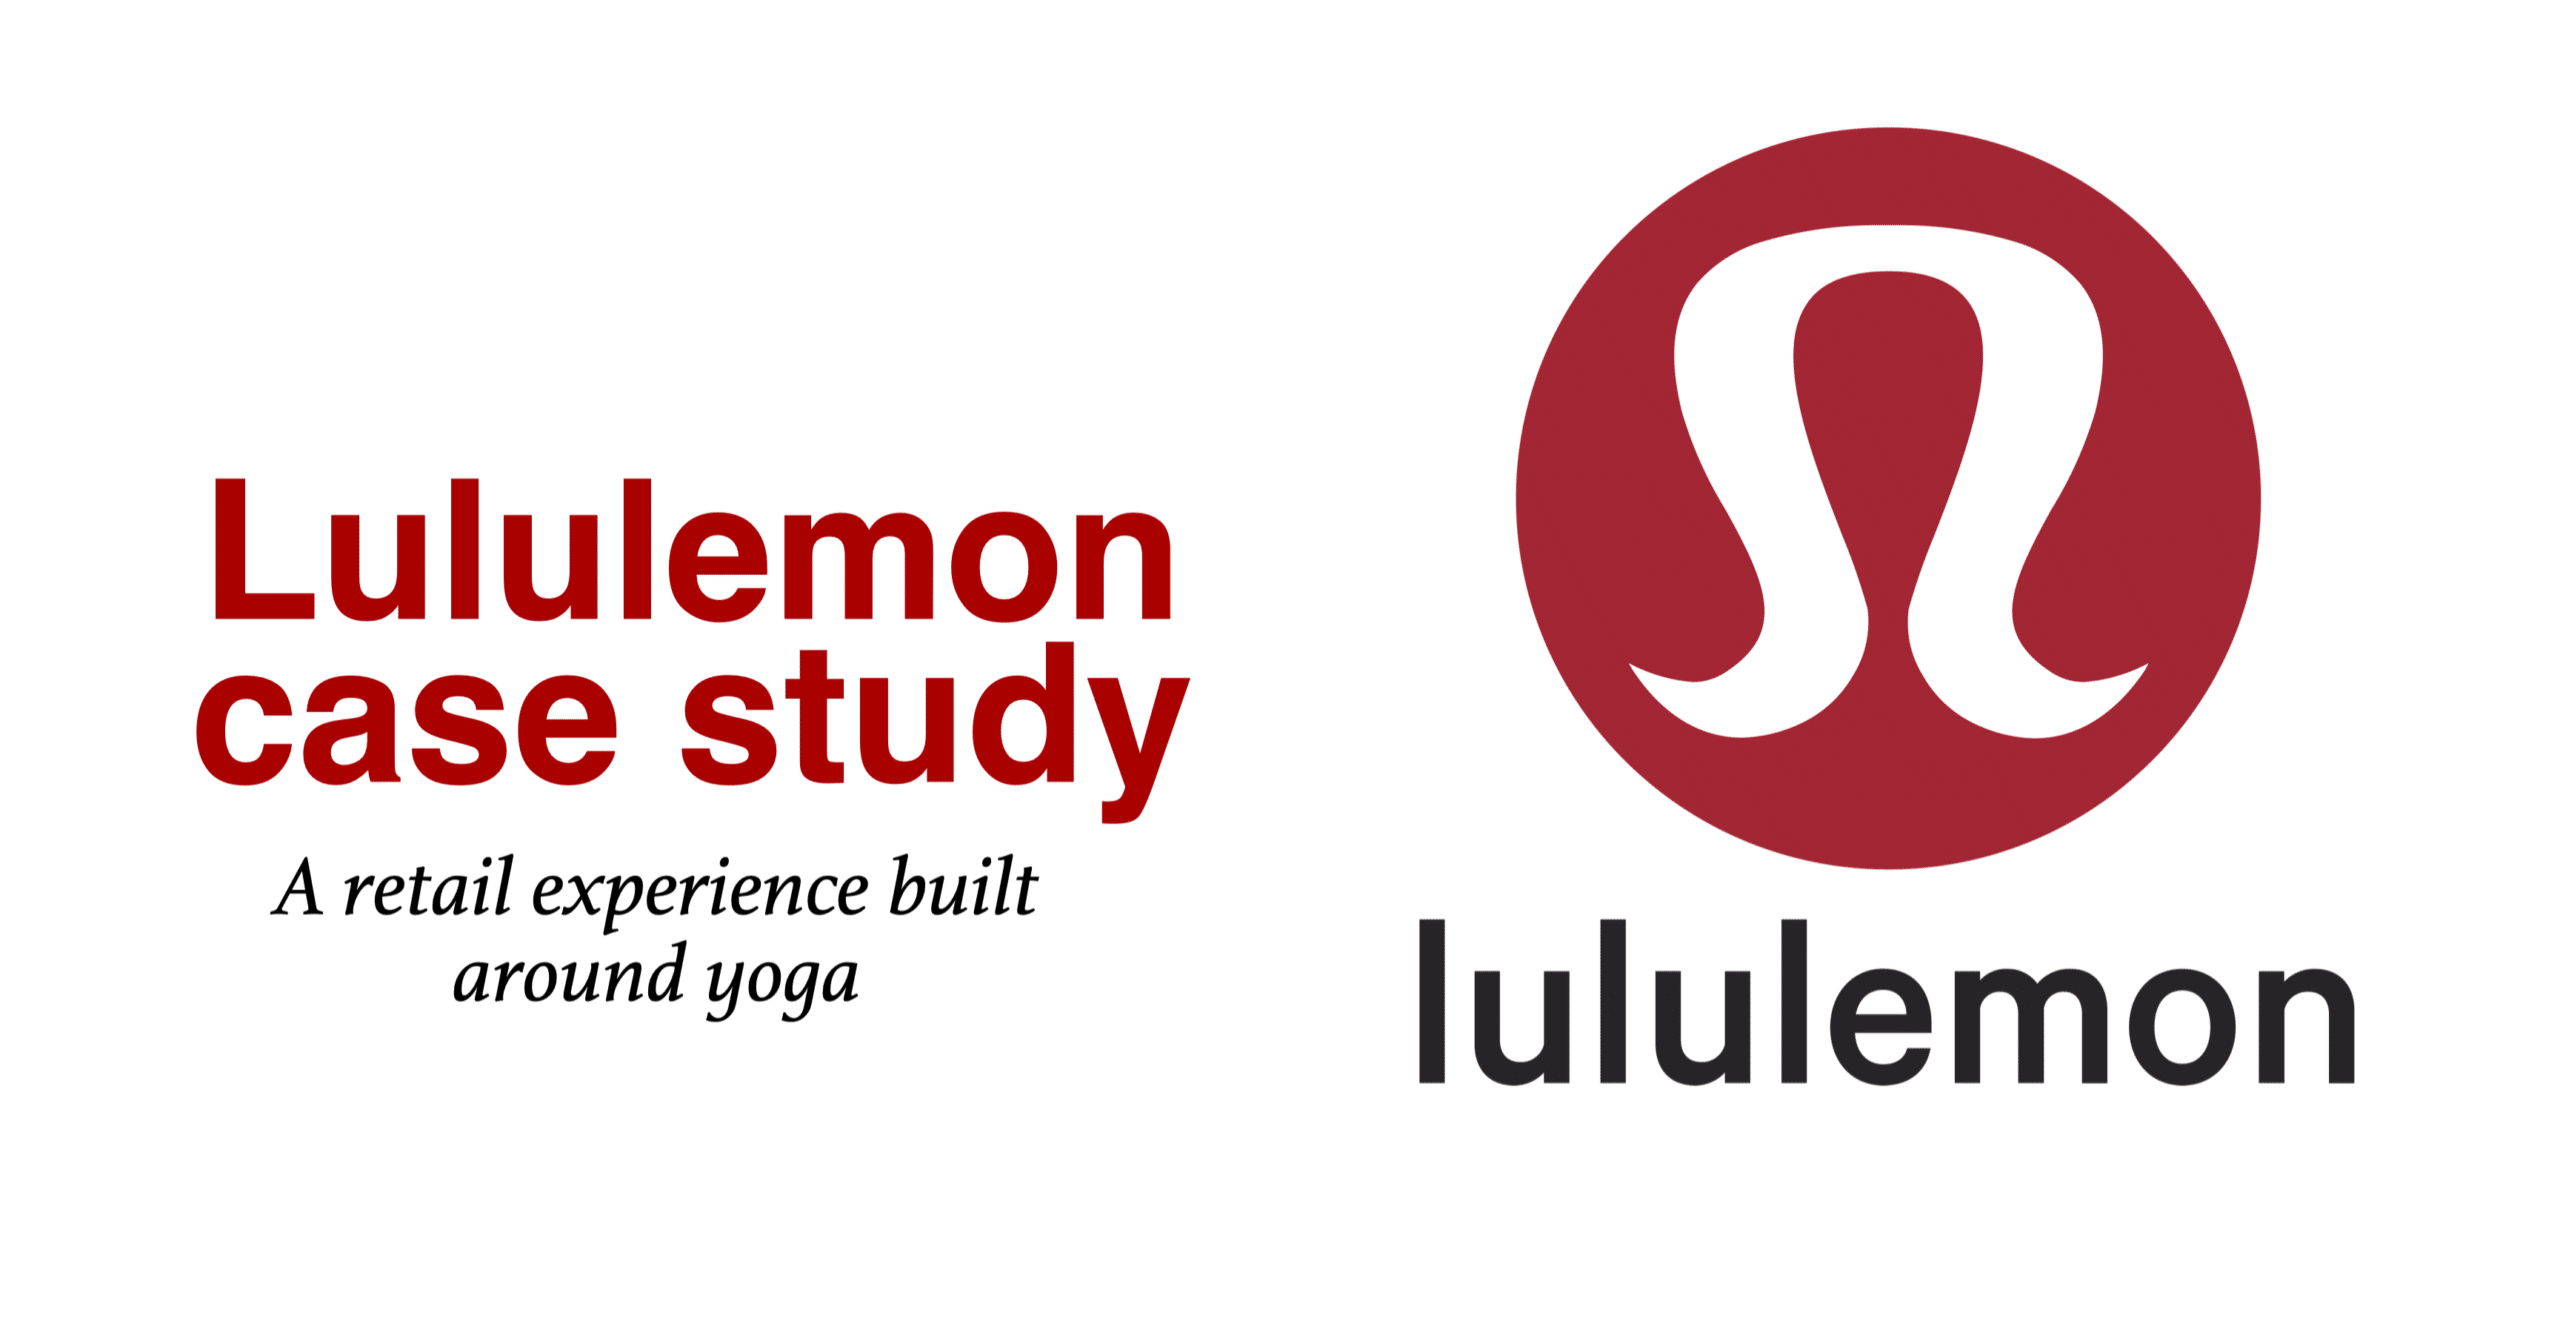 How Lululemon Builds Community To Create an Iconic Brand